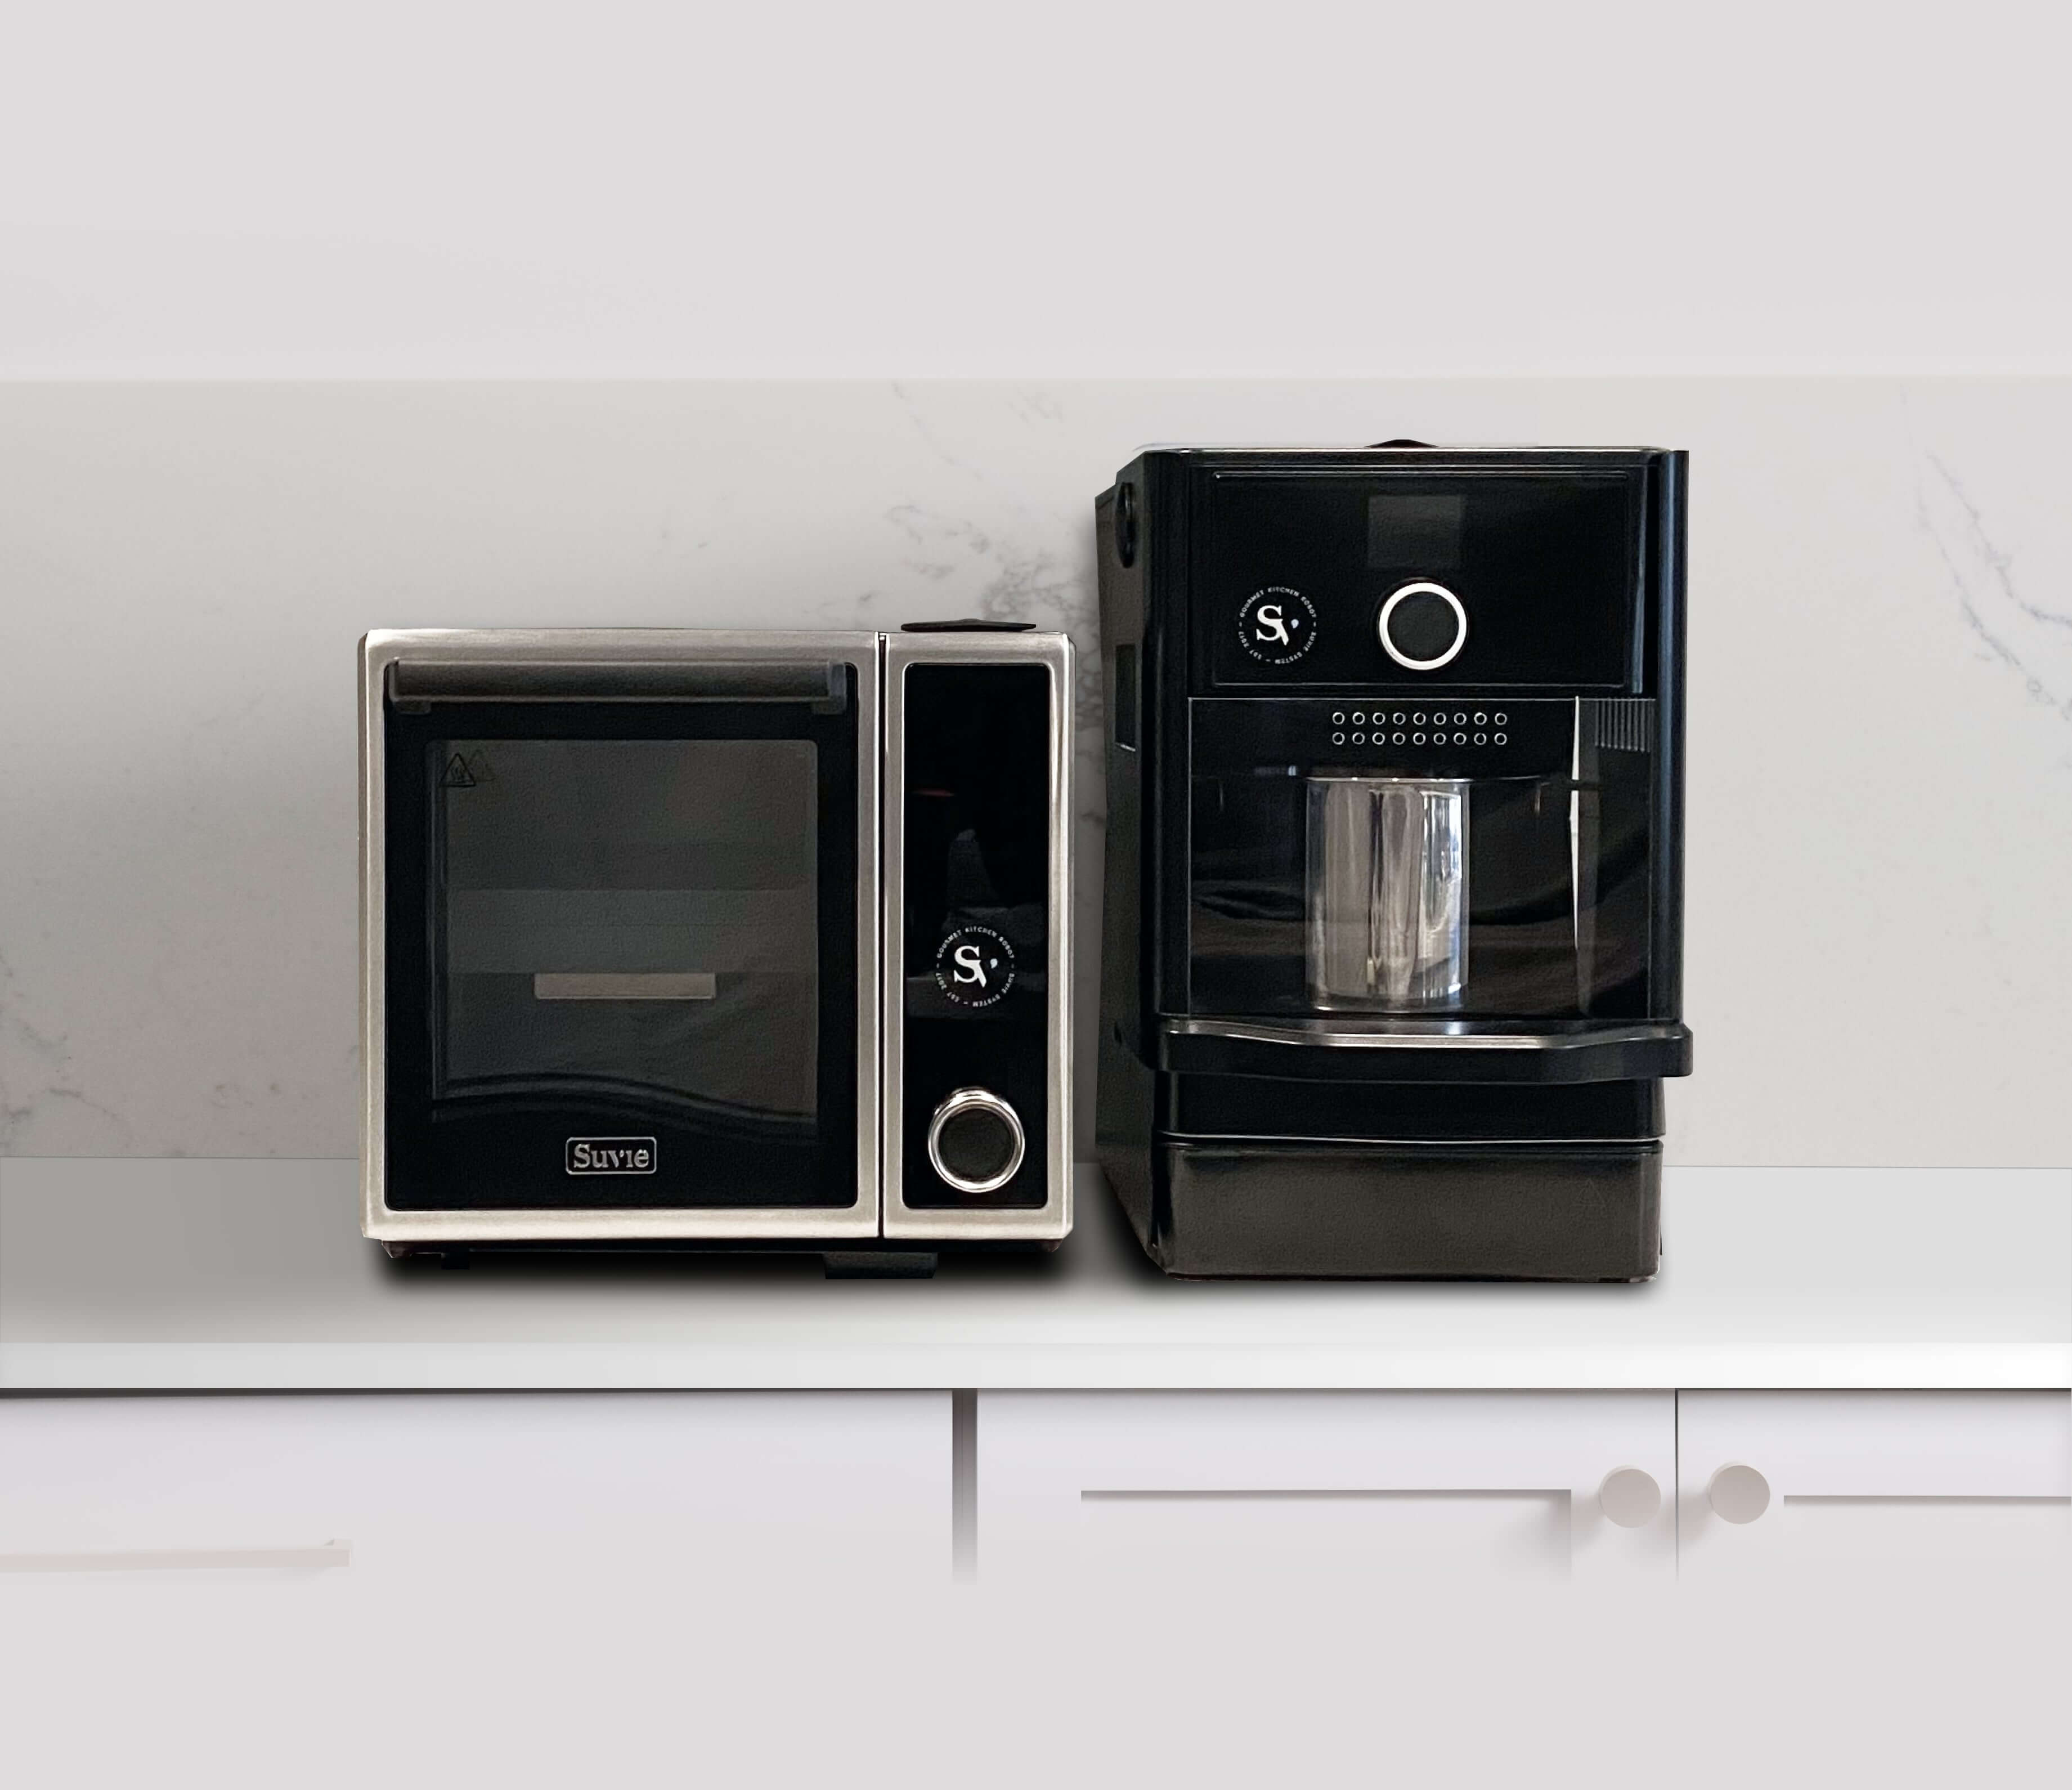 CES 2019: Wi-Fi-Enabled Suvie is Part Cooker, Part Refrigerator